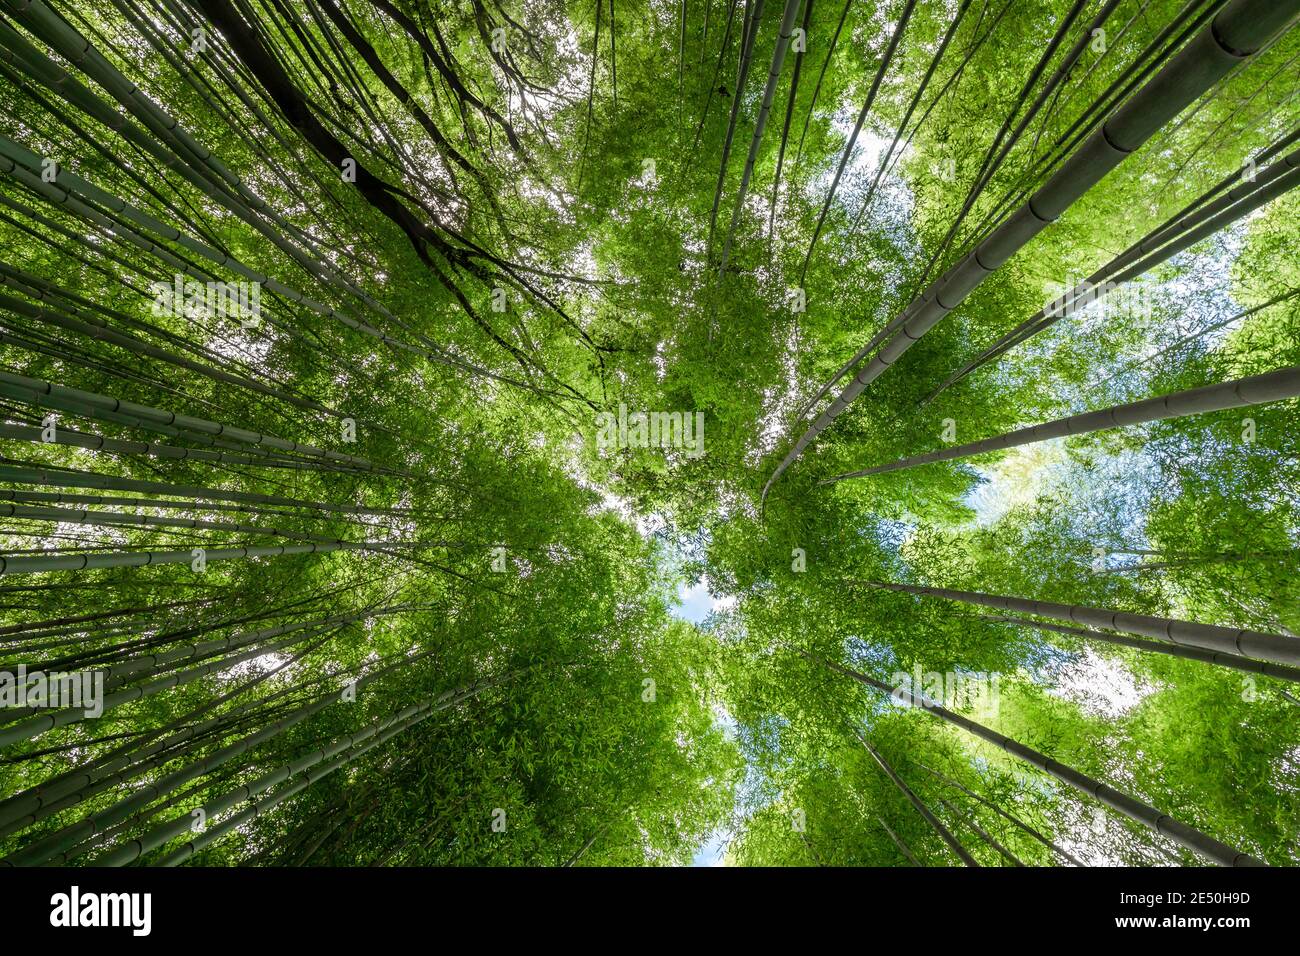 The crown of the trees in the Arashiyama bamboo grove seen from below Stock Photo